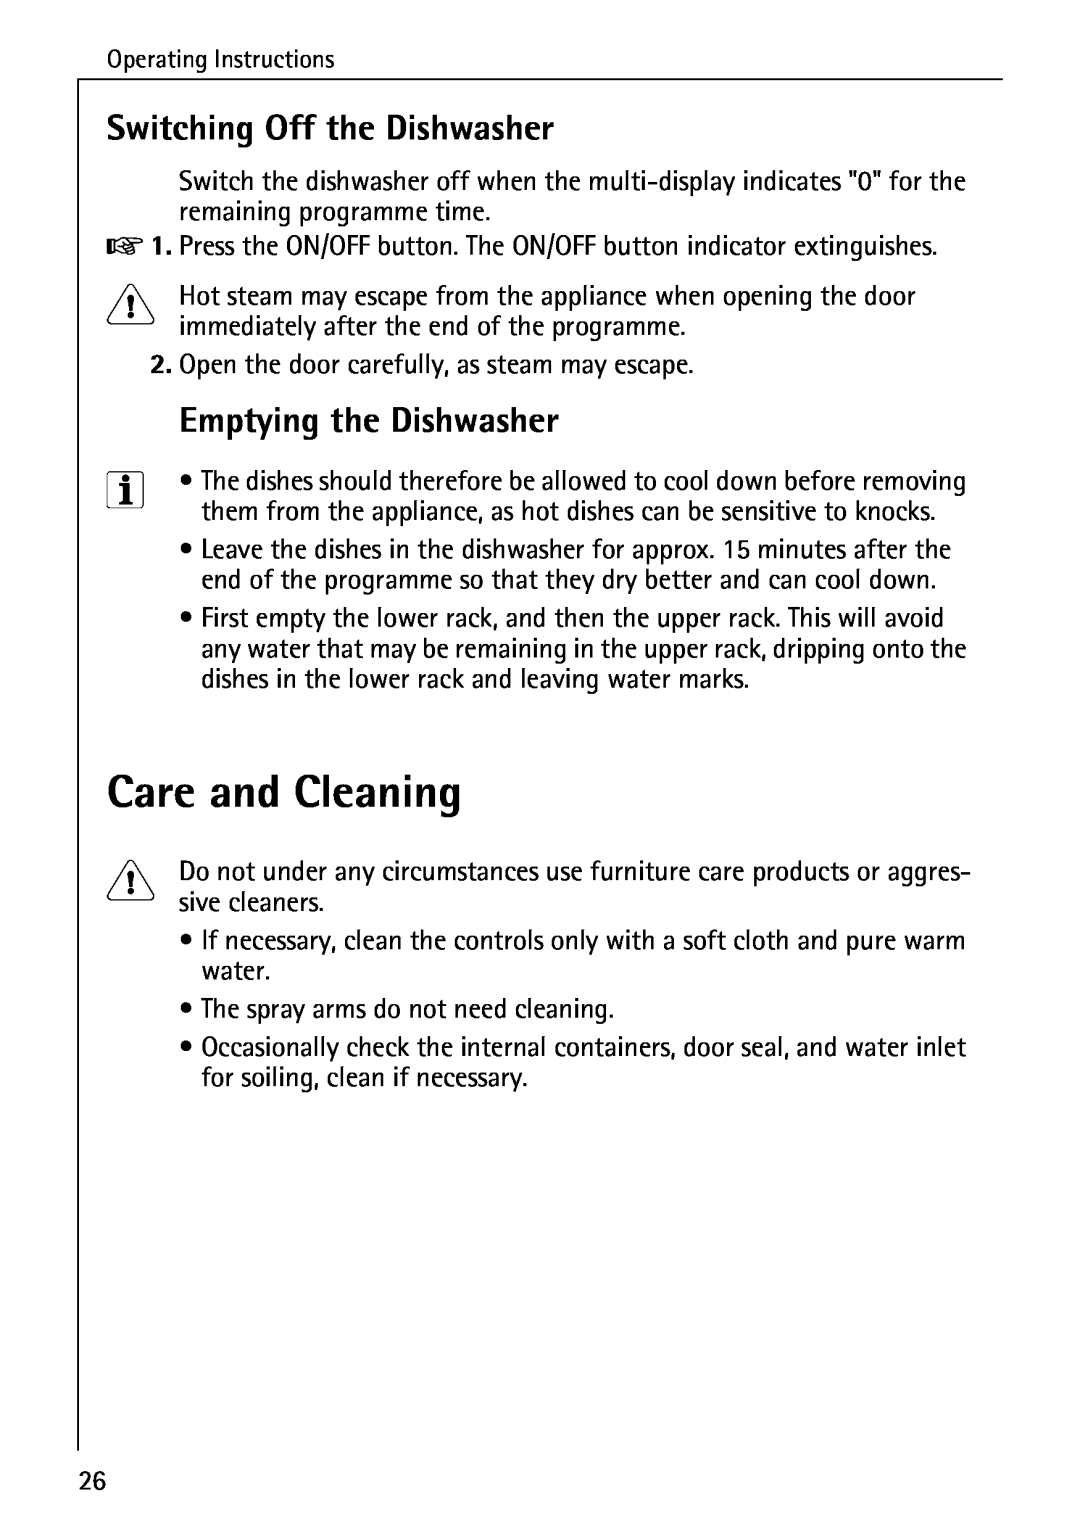 AEG 3A manual Care and Cleaning, Switching Off the Dishwasher, Emptying the Dishwasher 